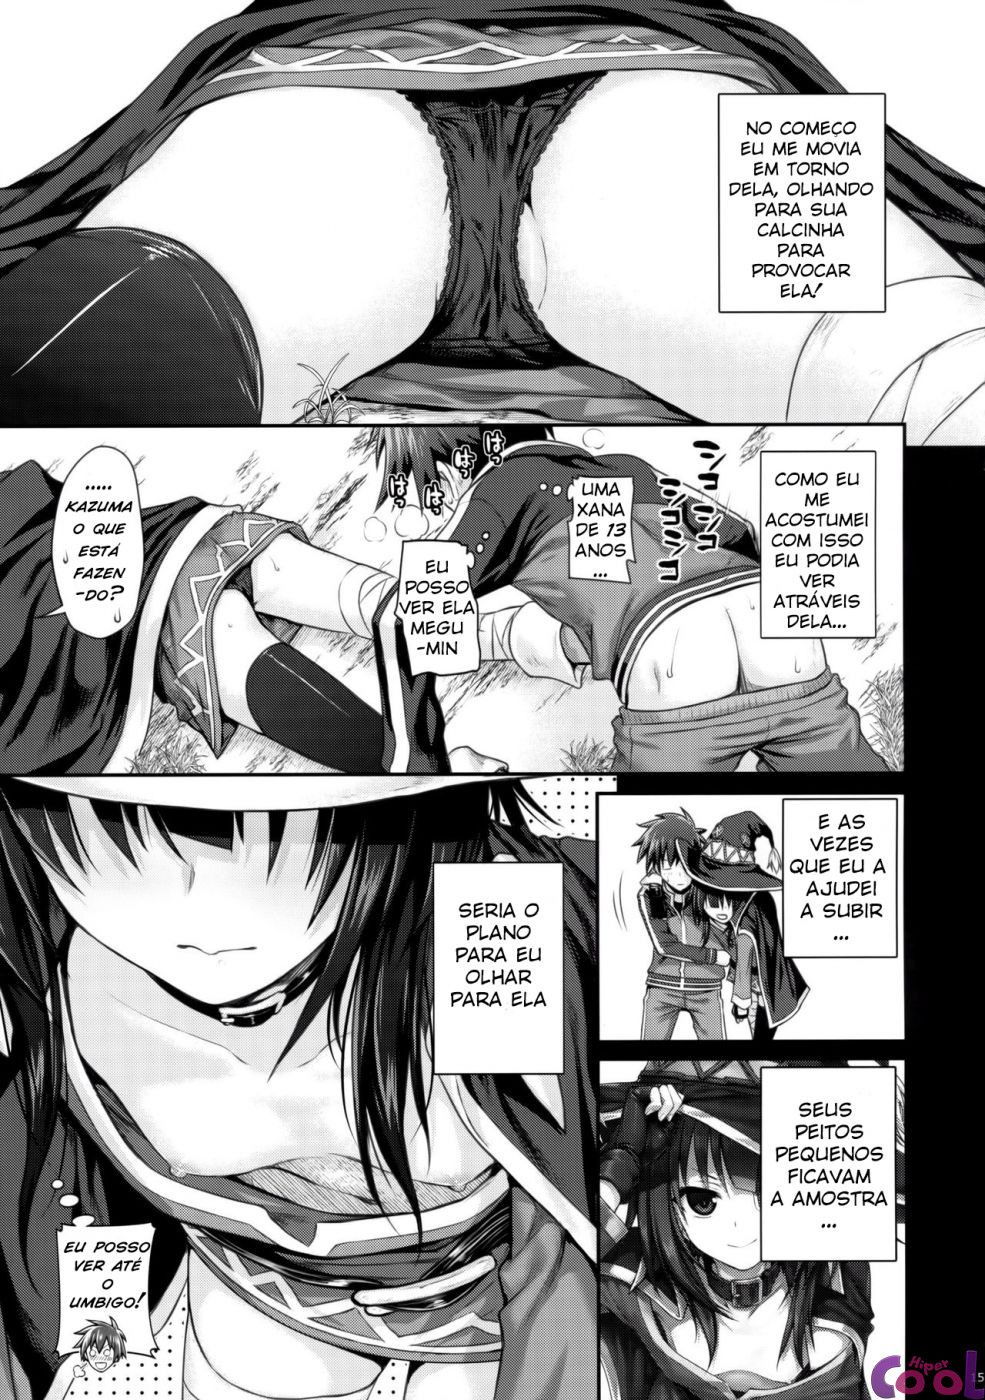 choygedo-chapter-01-page-15.jpg